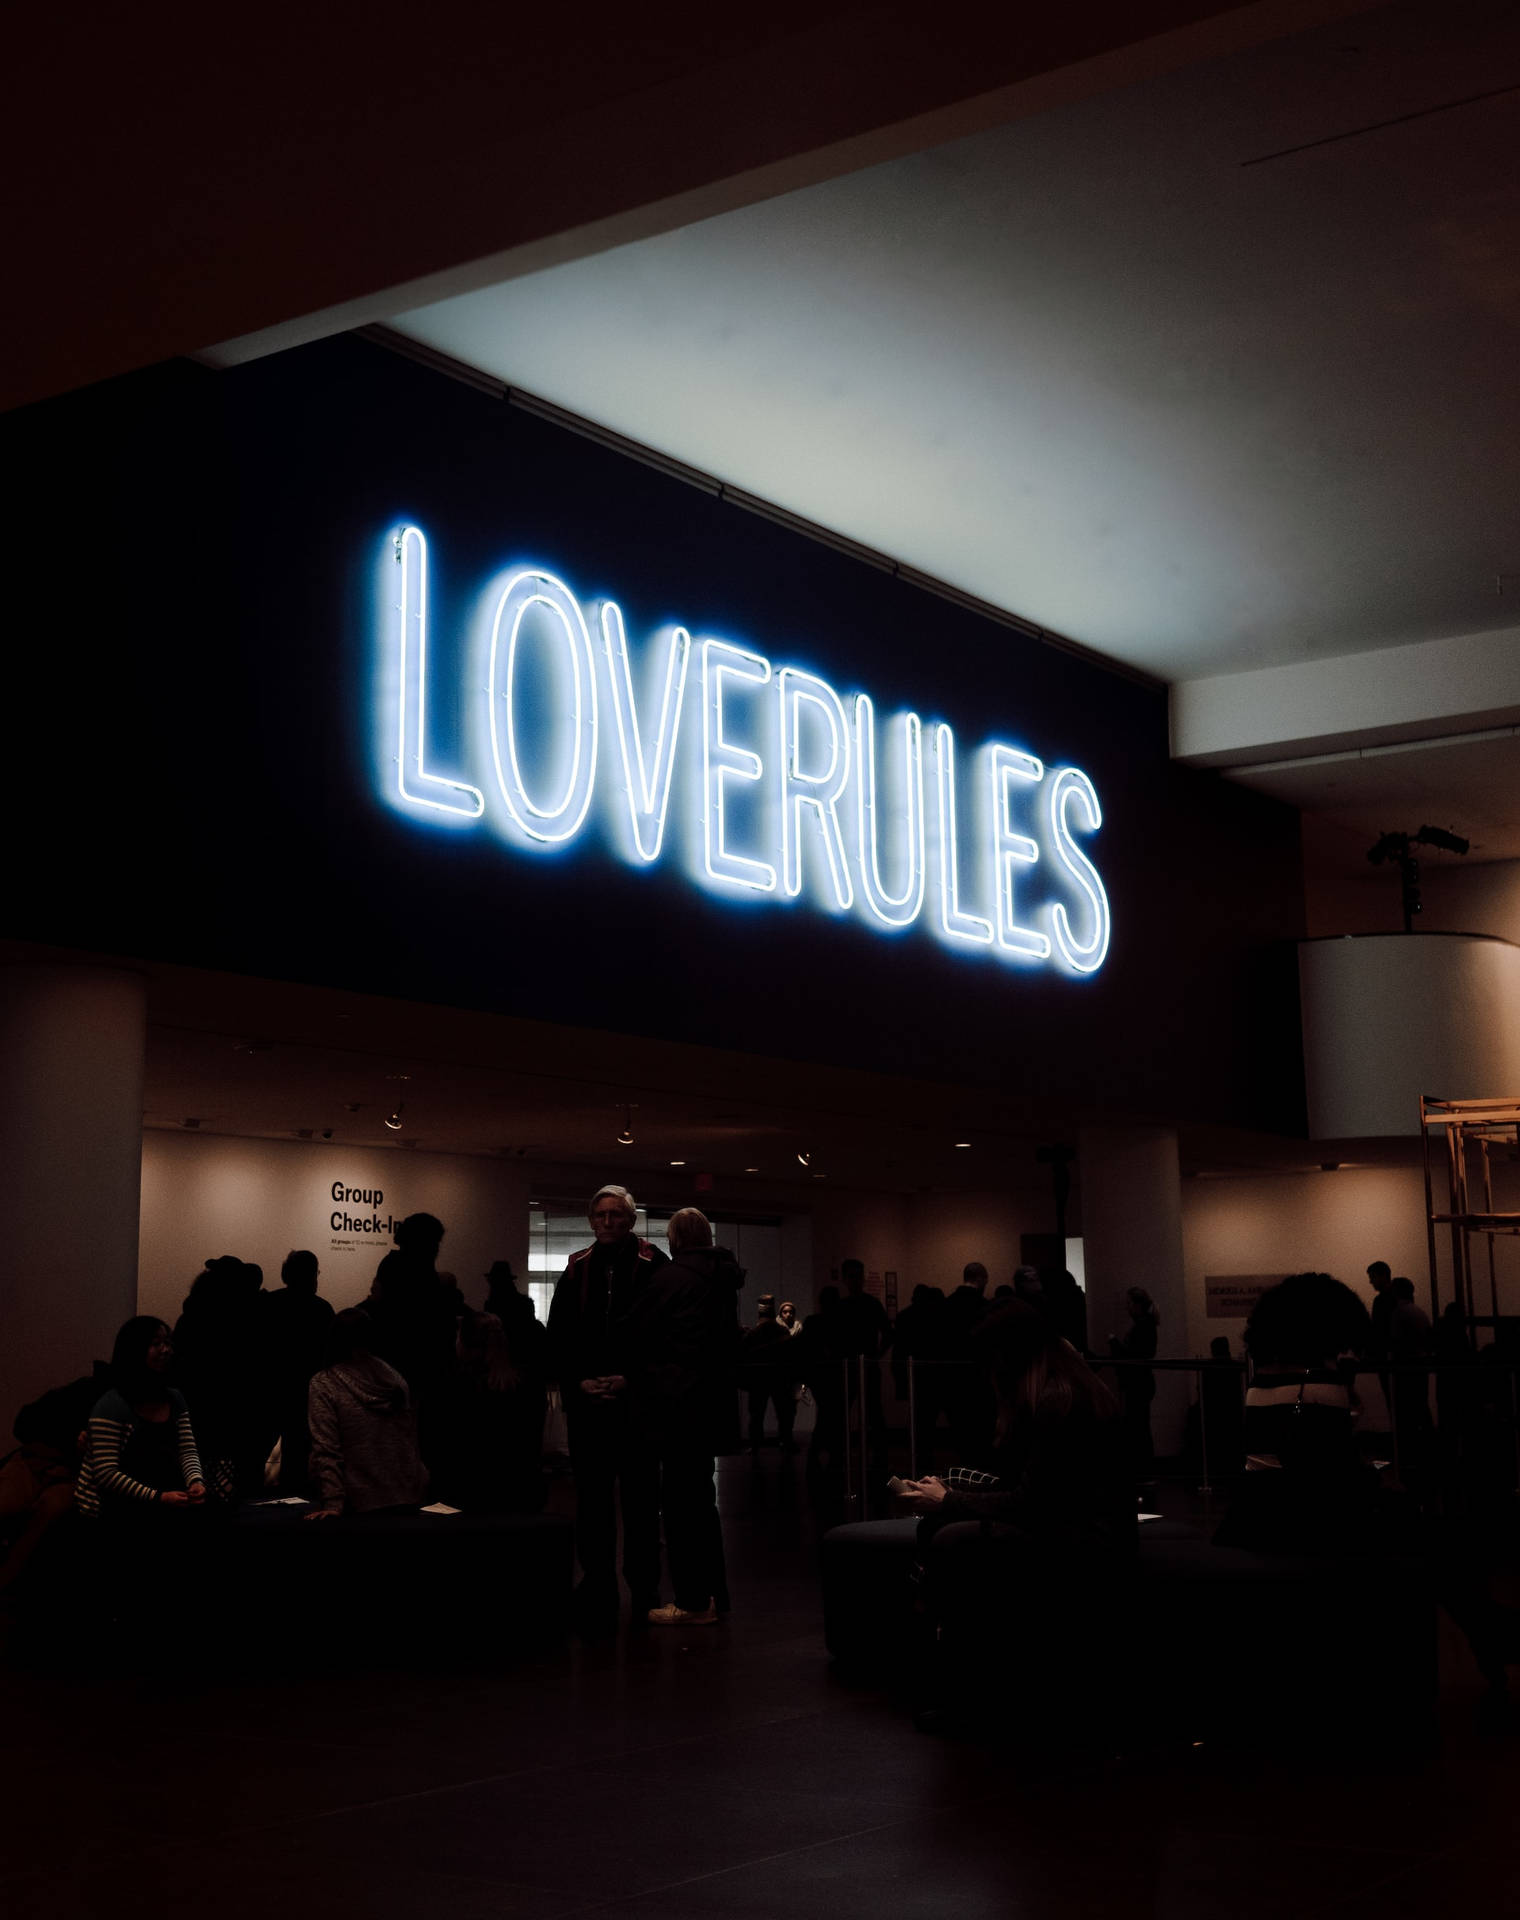 LOVERULES Signage In Neon Blue iPhone Wallpaper